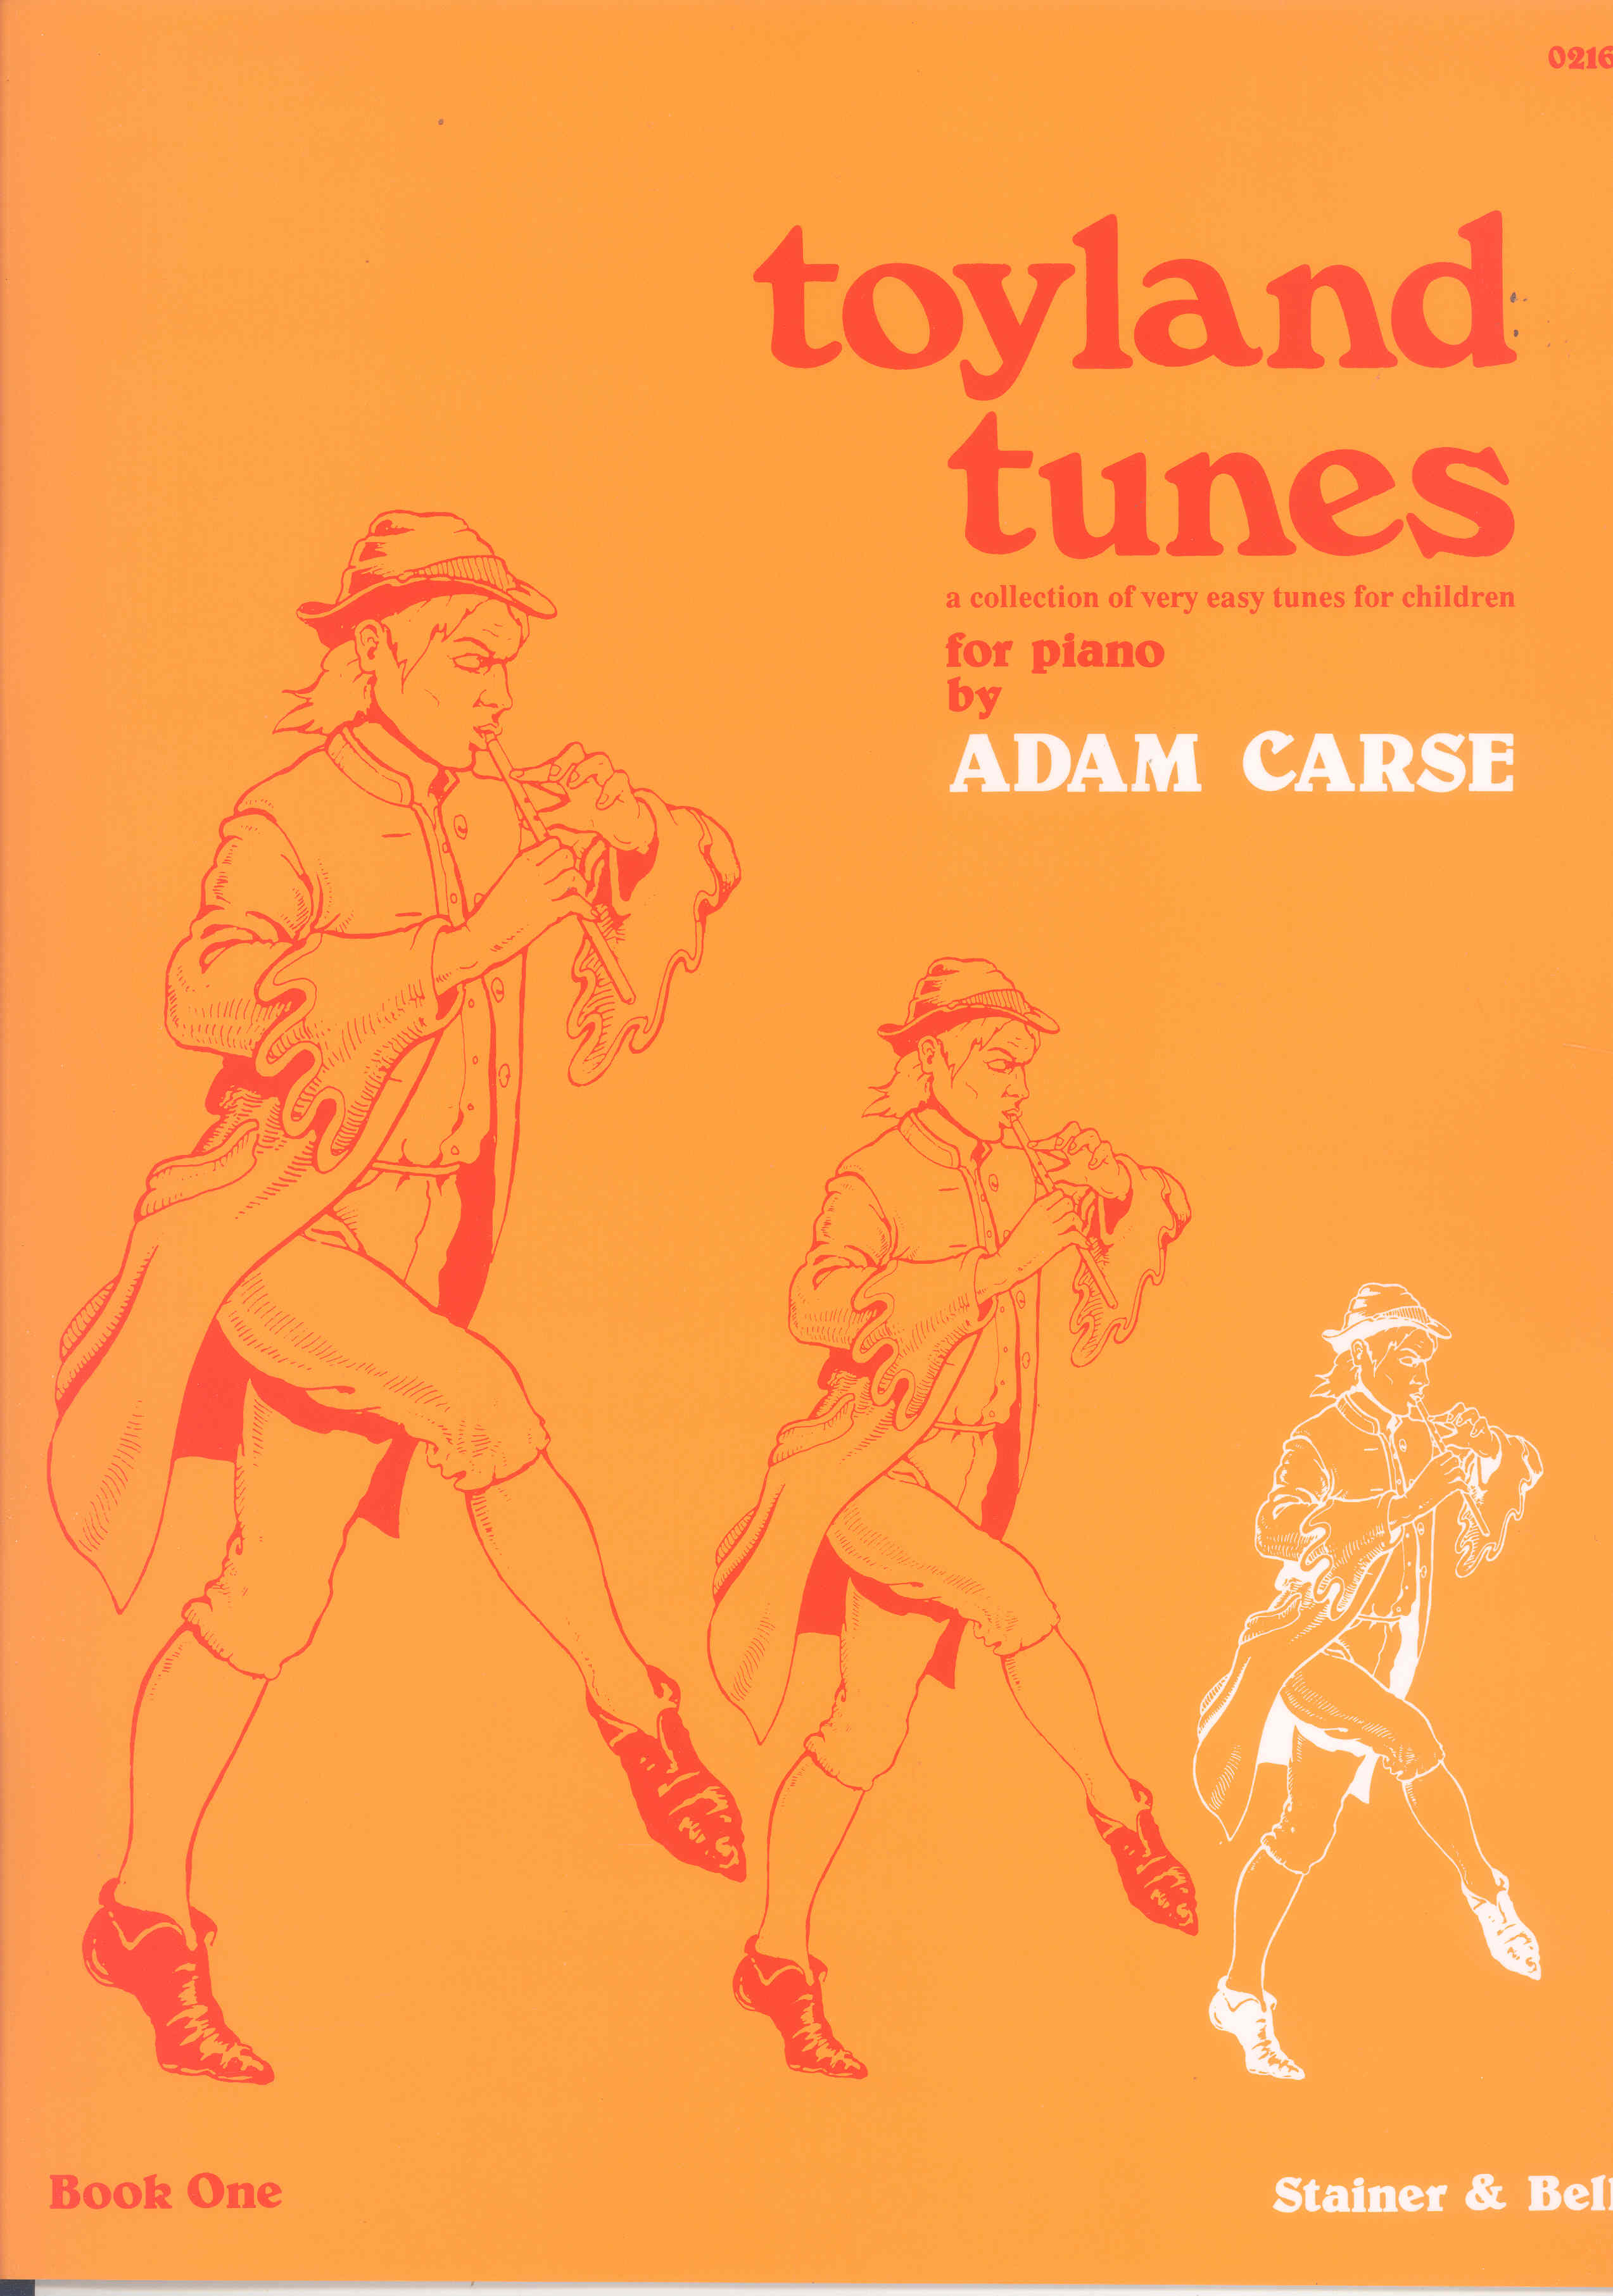 Toyland Tunes Book 1 Carse Piano Sheet Music Songbook